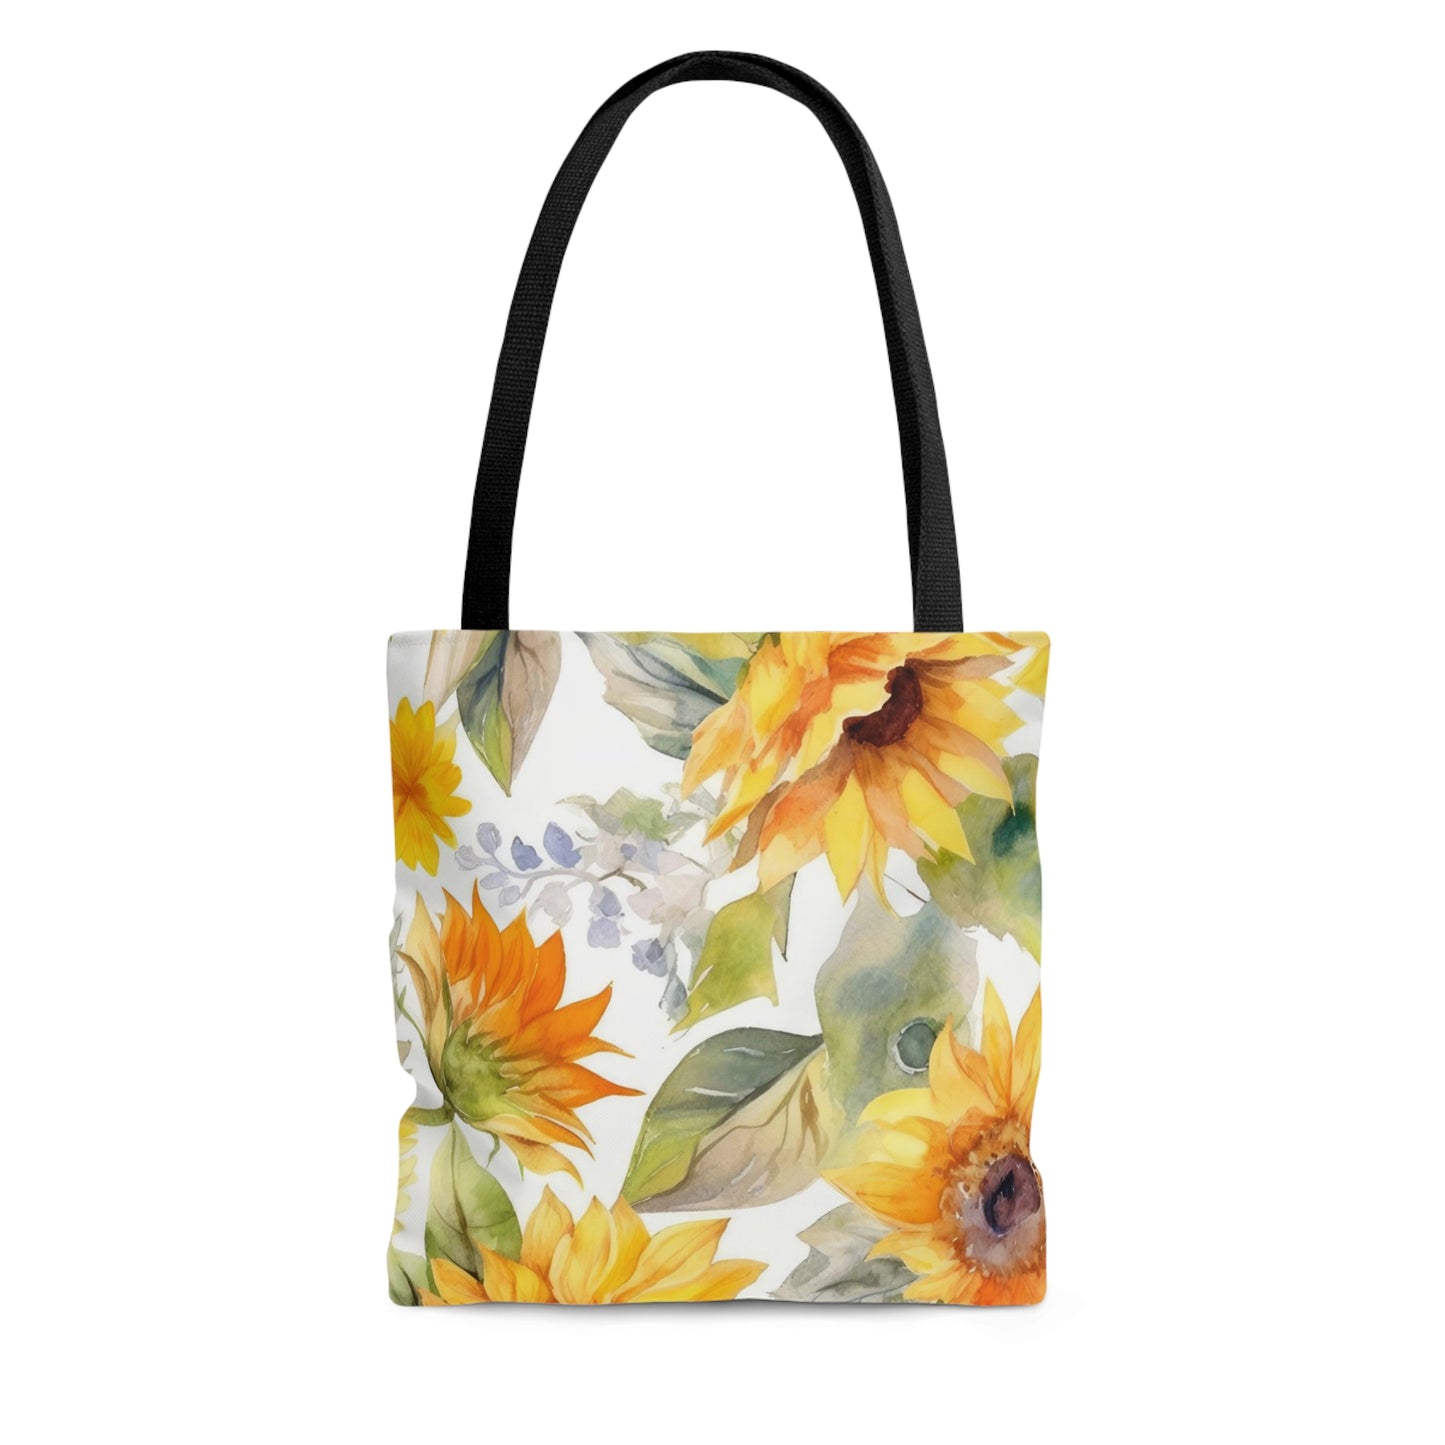 Yellow Sunflowers Tote Bag, Polyester Canvas Tote Bag, Cute Yellow Flowers Shopping Bag, Reusable Tote, Summer Tote